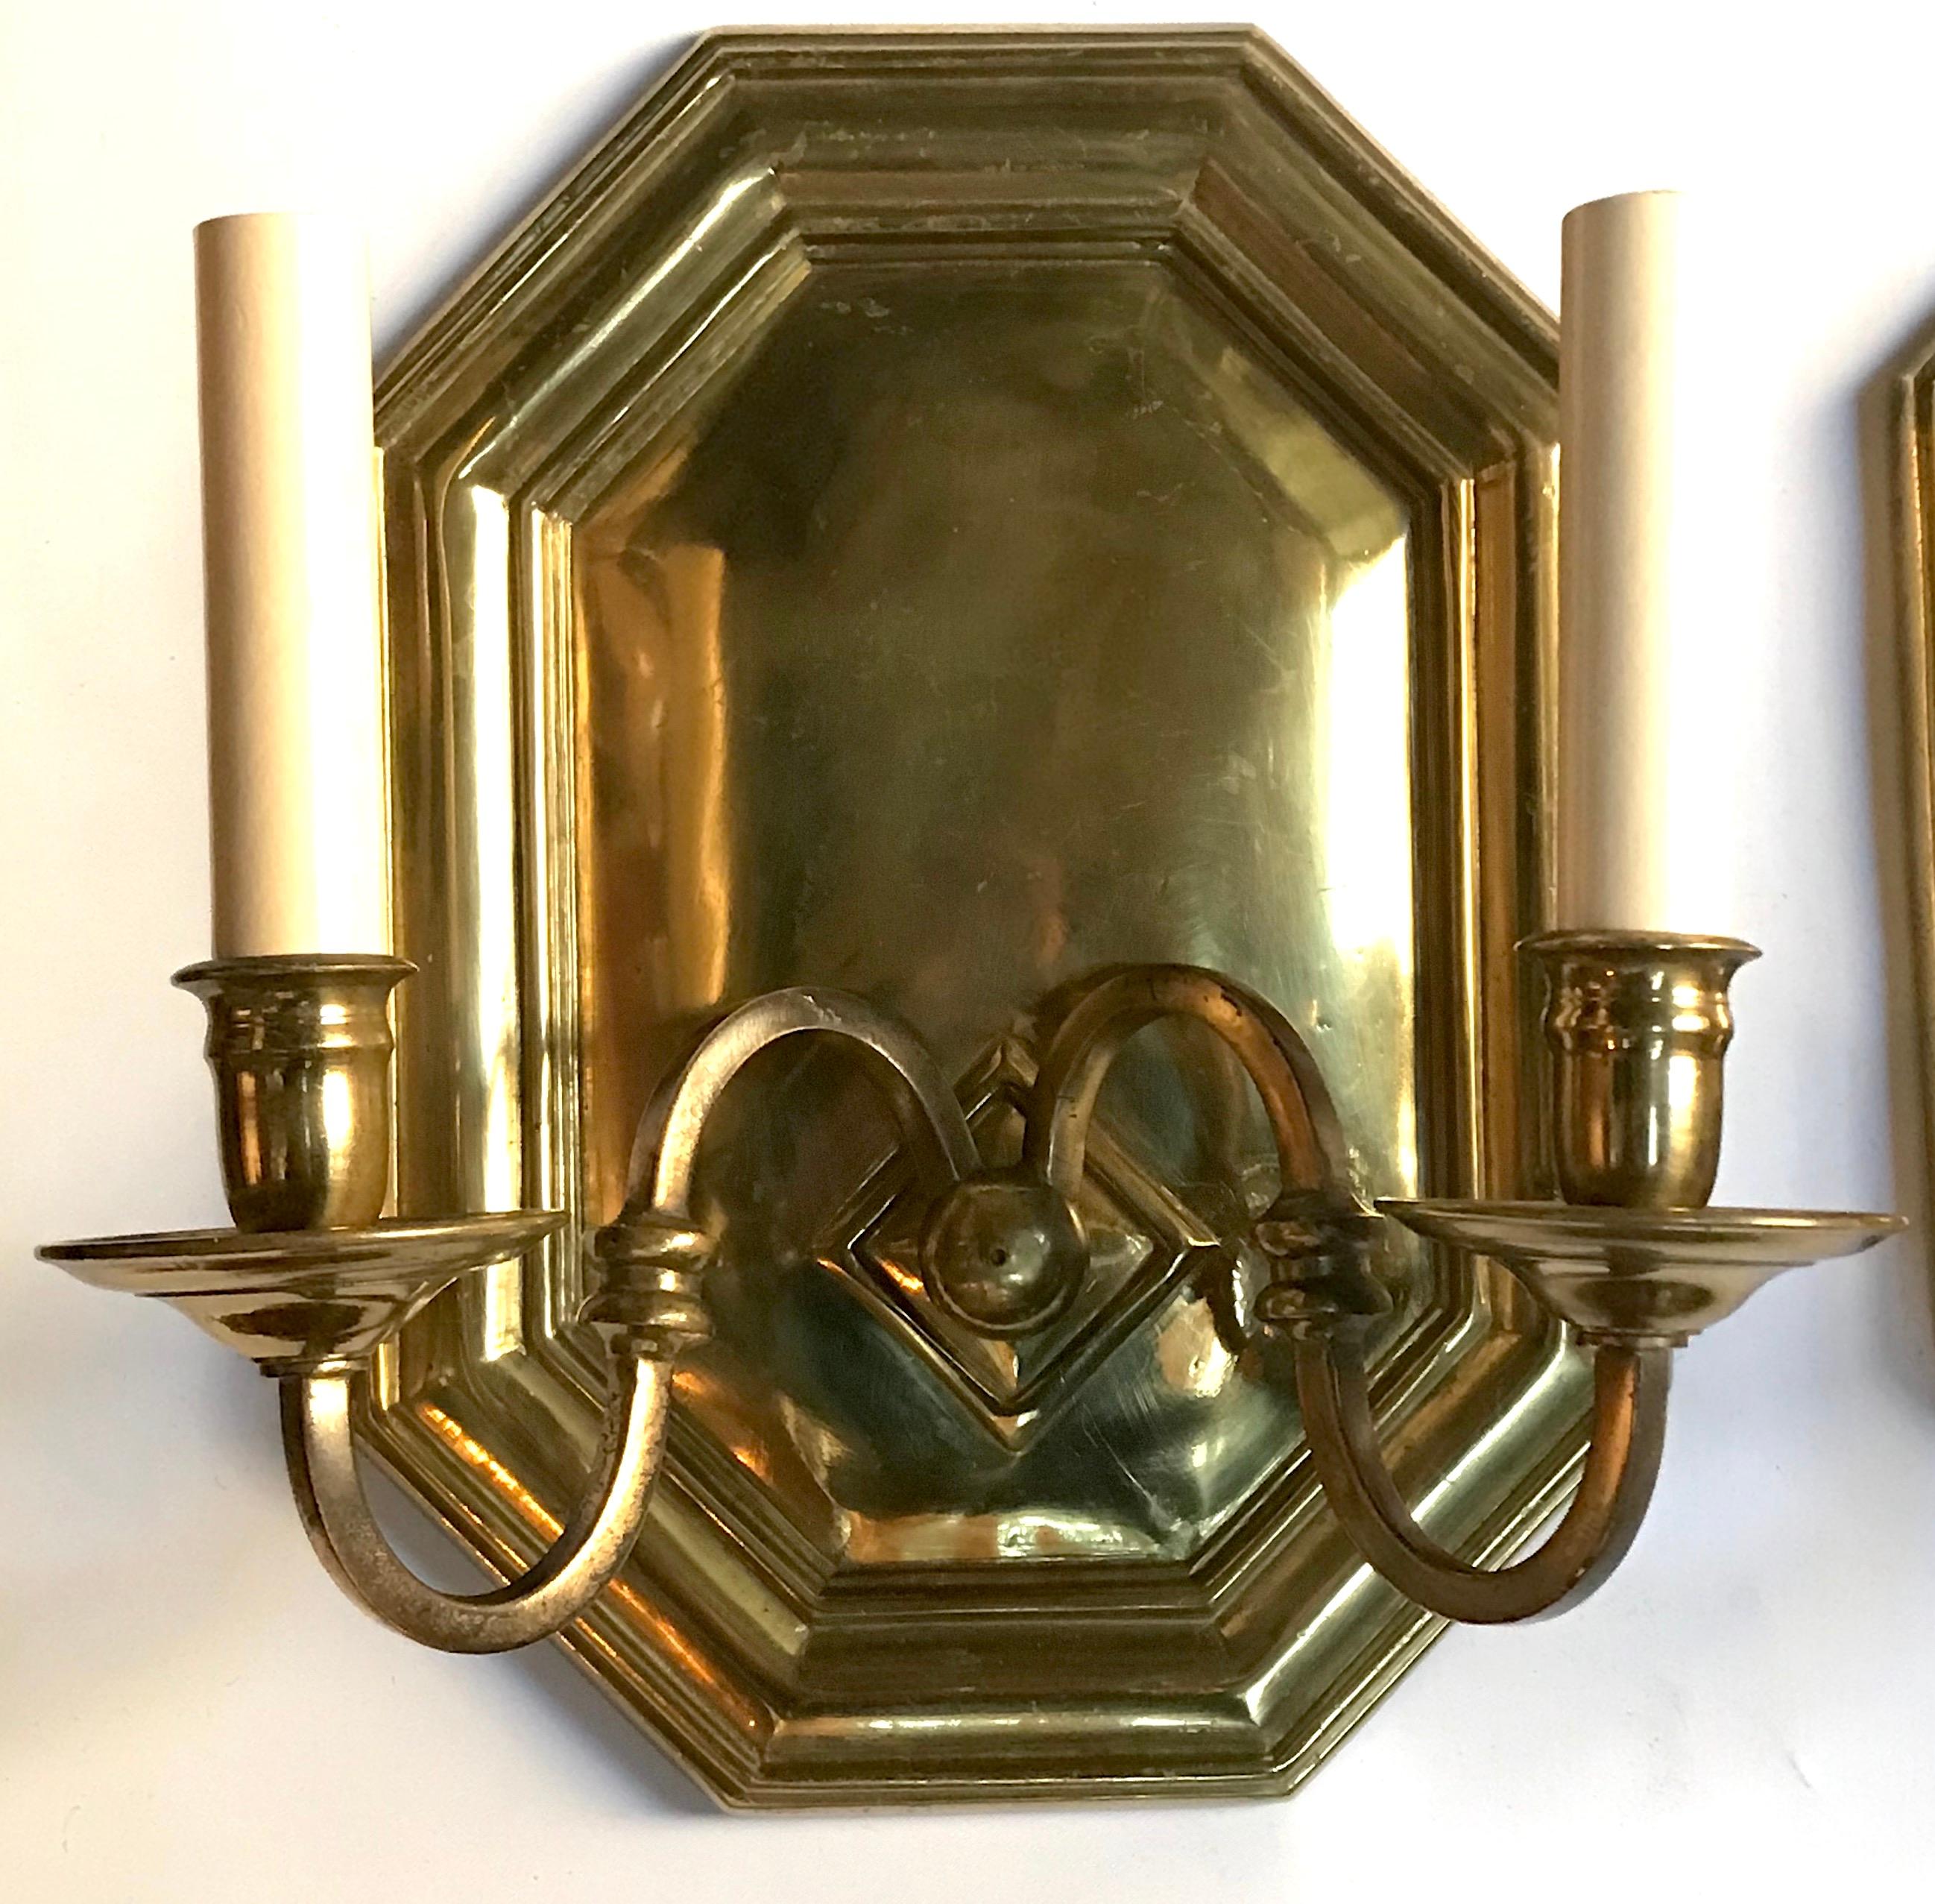 Pair of circa 1940's French bronze neoclassic octagonal sconces with original patina.

Measurements:
Height: 11.25